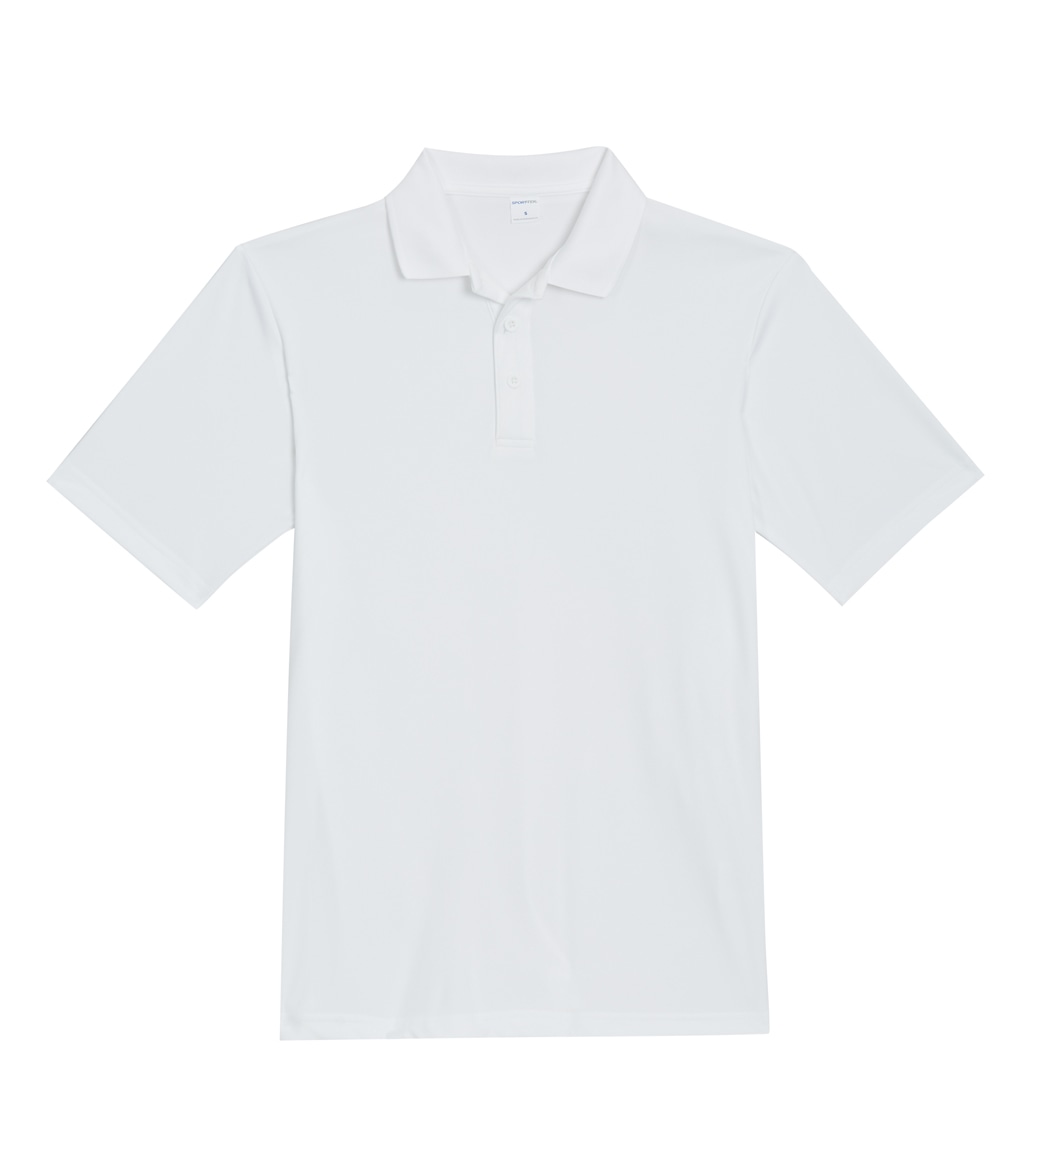 Men's Sport-Tek Posicharge Competitortm Polo - White Small Polyester - Swimoutlet.com